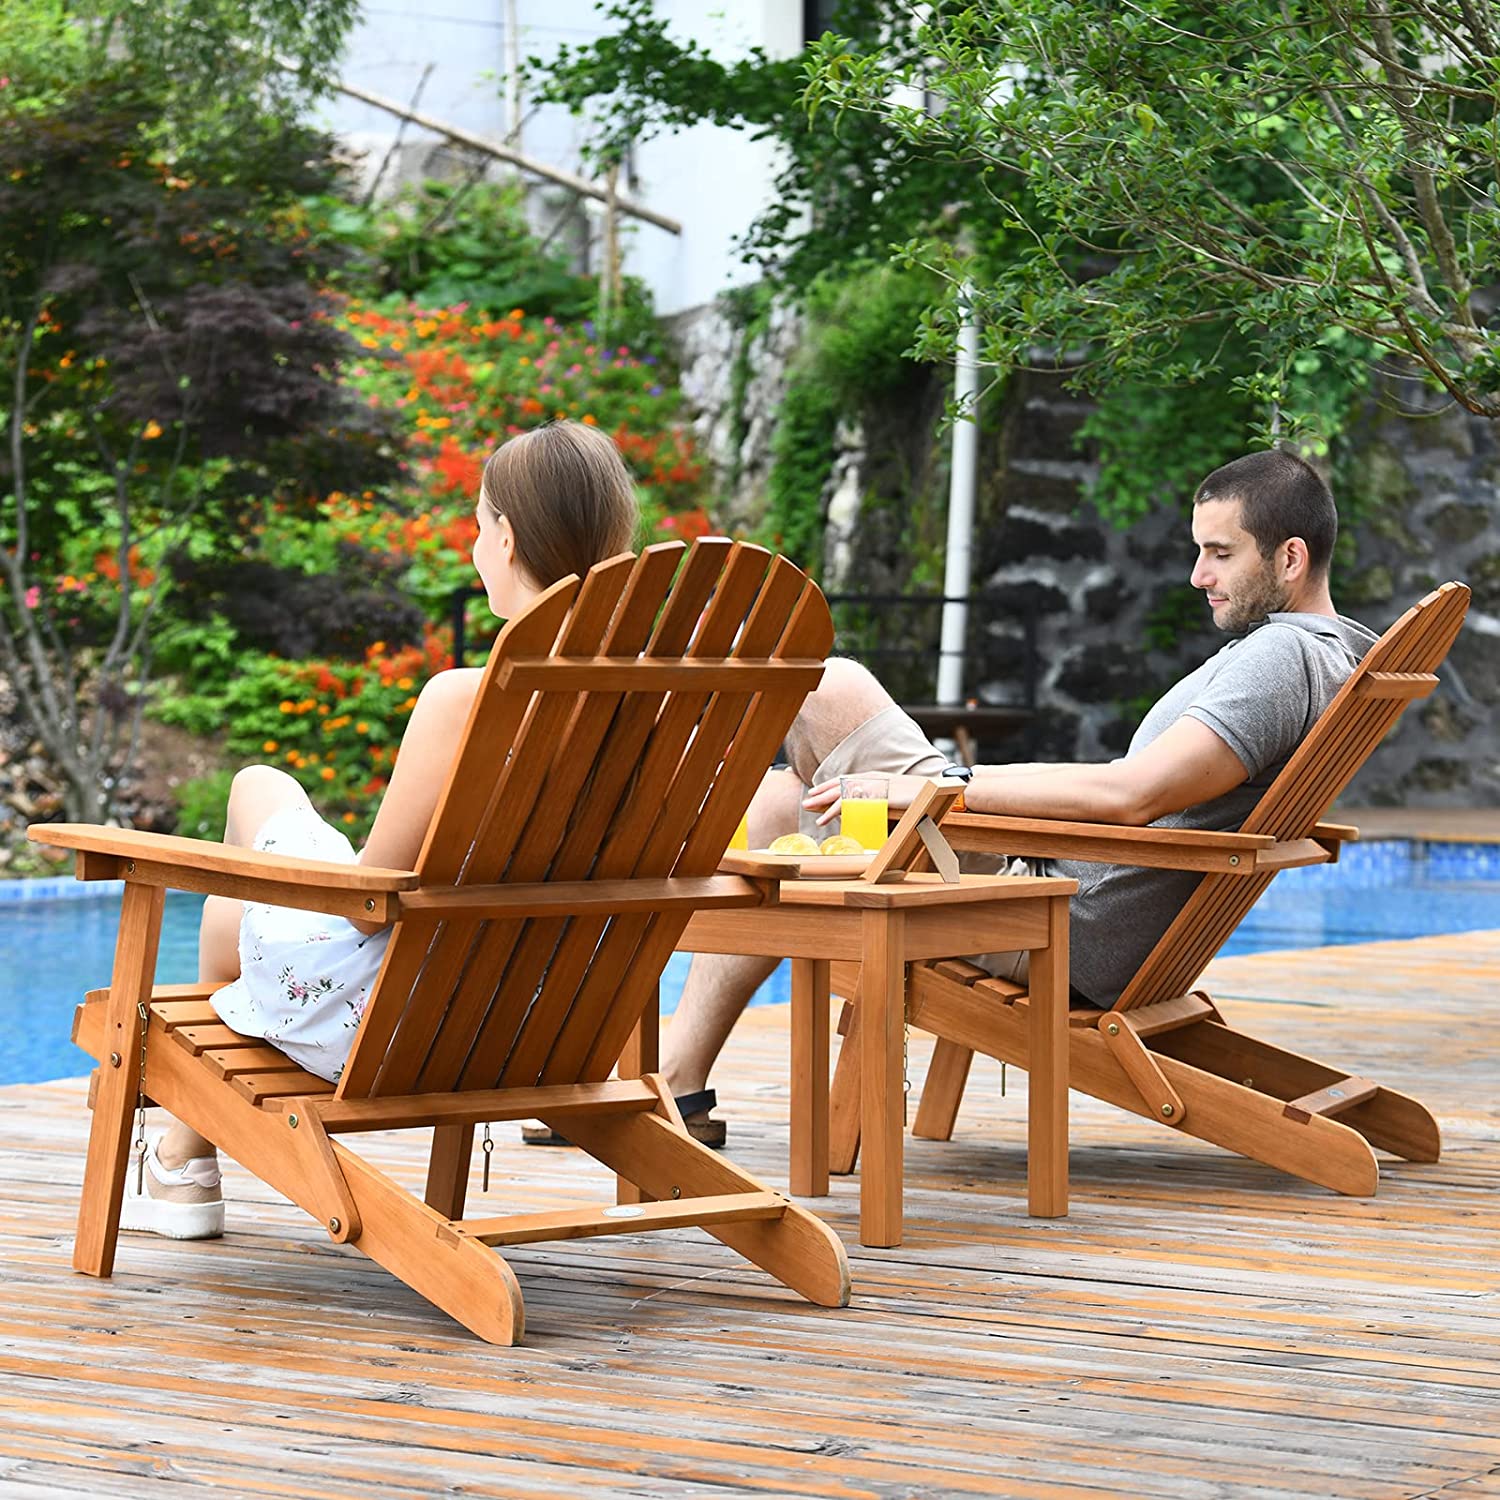 3 Pieces Foldable Adirondack Chair Set Wooden Lounger Chair with Widened Armrest and Side Table for Patio Poolside Garden